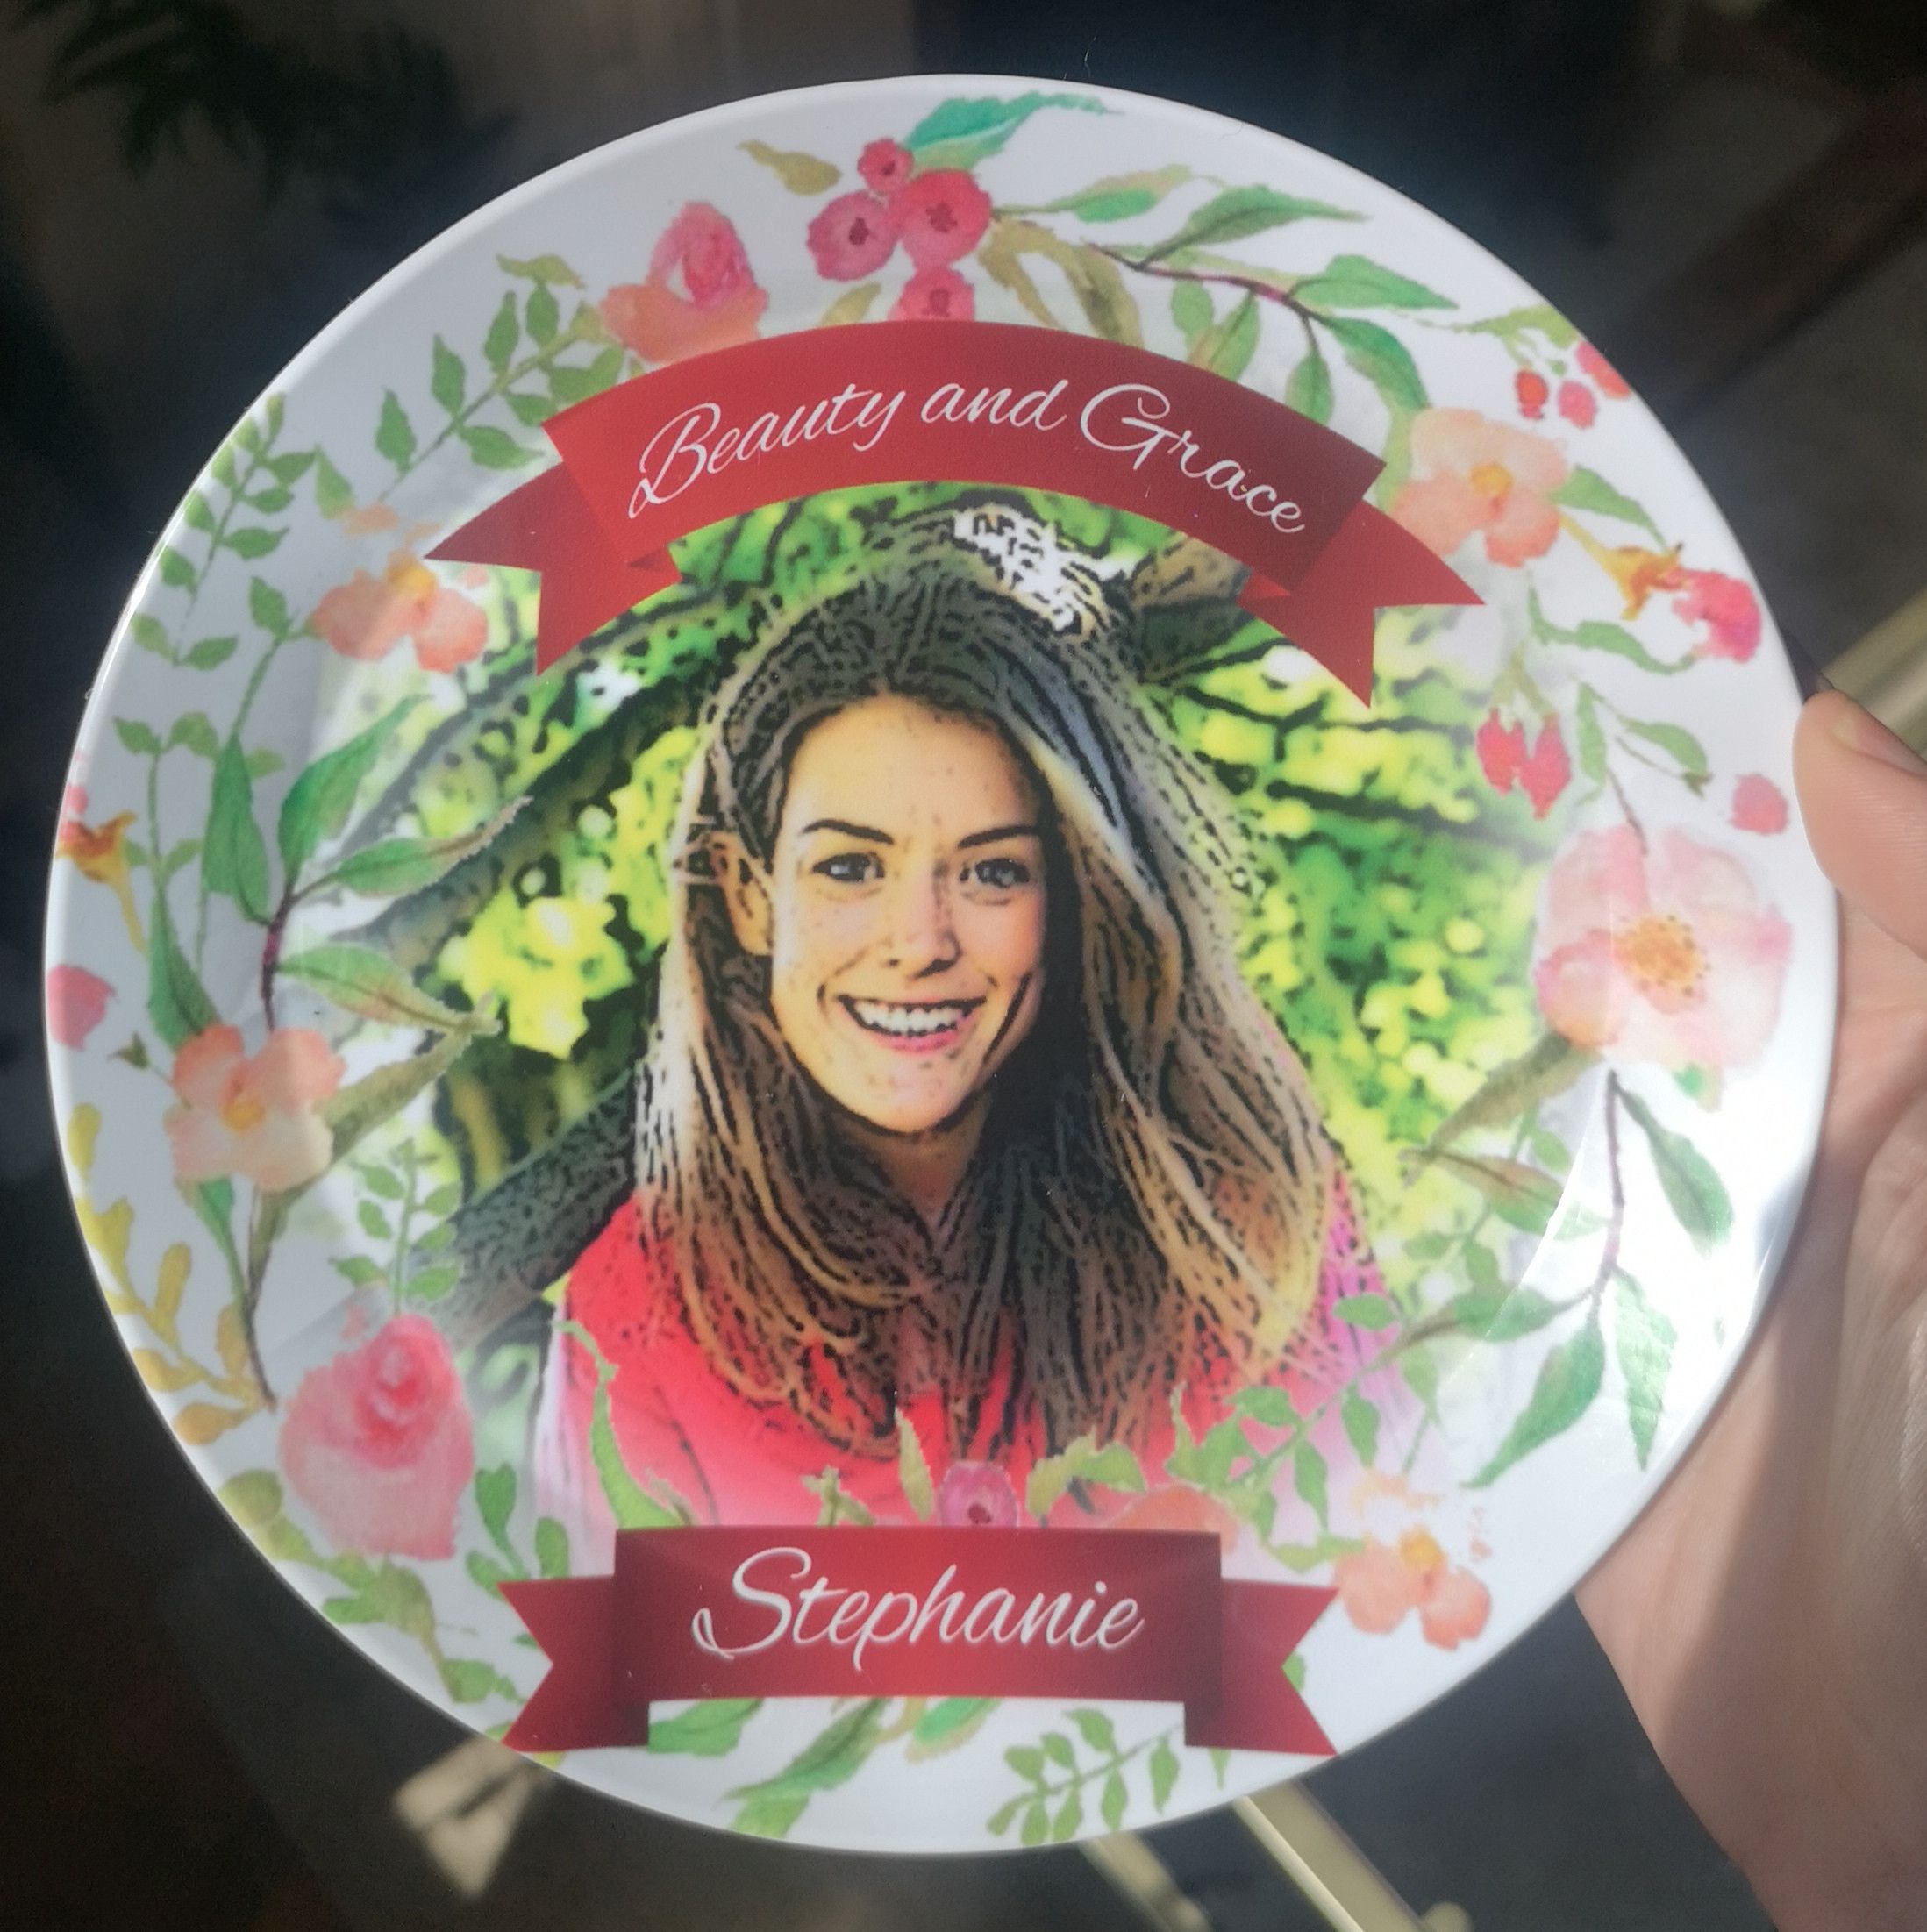 My wife complained that she'd never be on a commemorative plate like the Royal Family so I had this made.